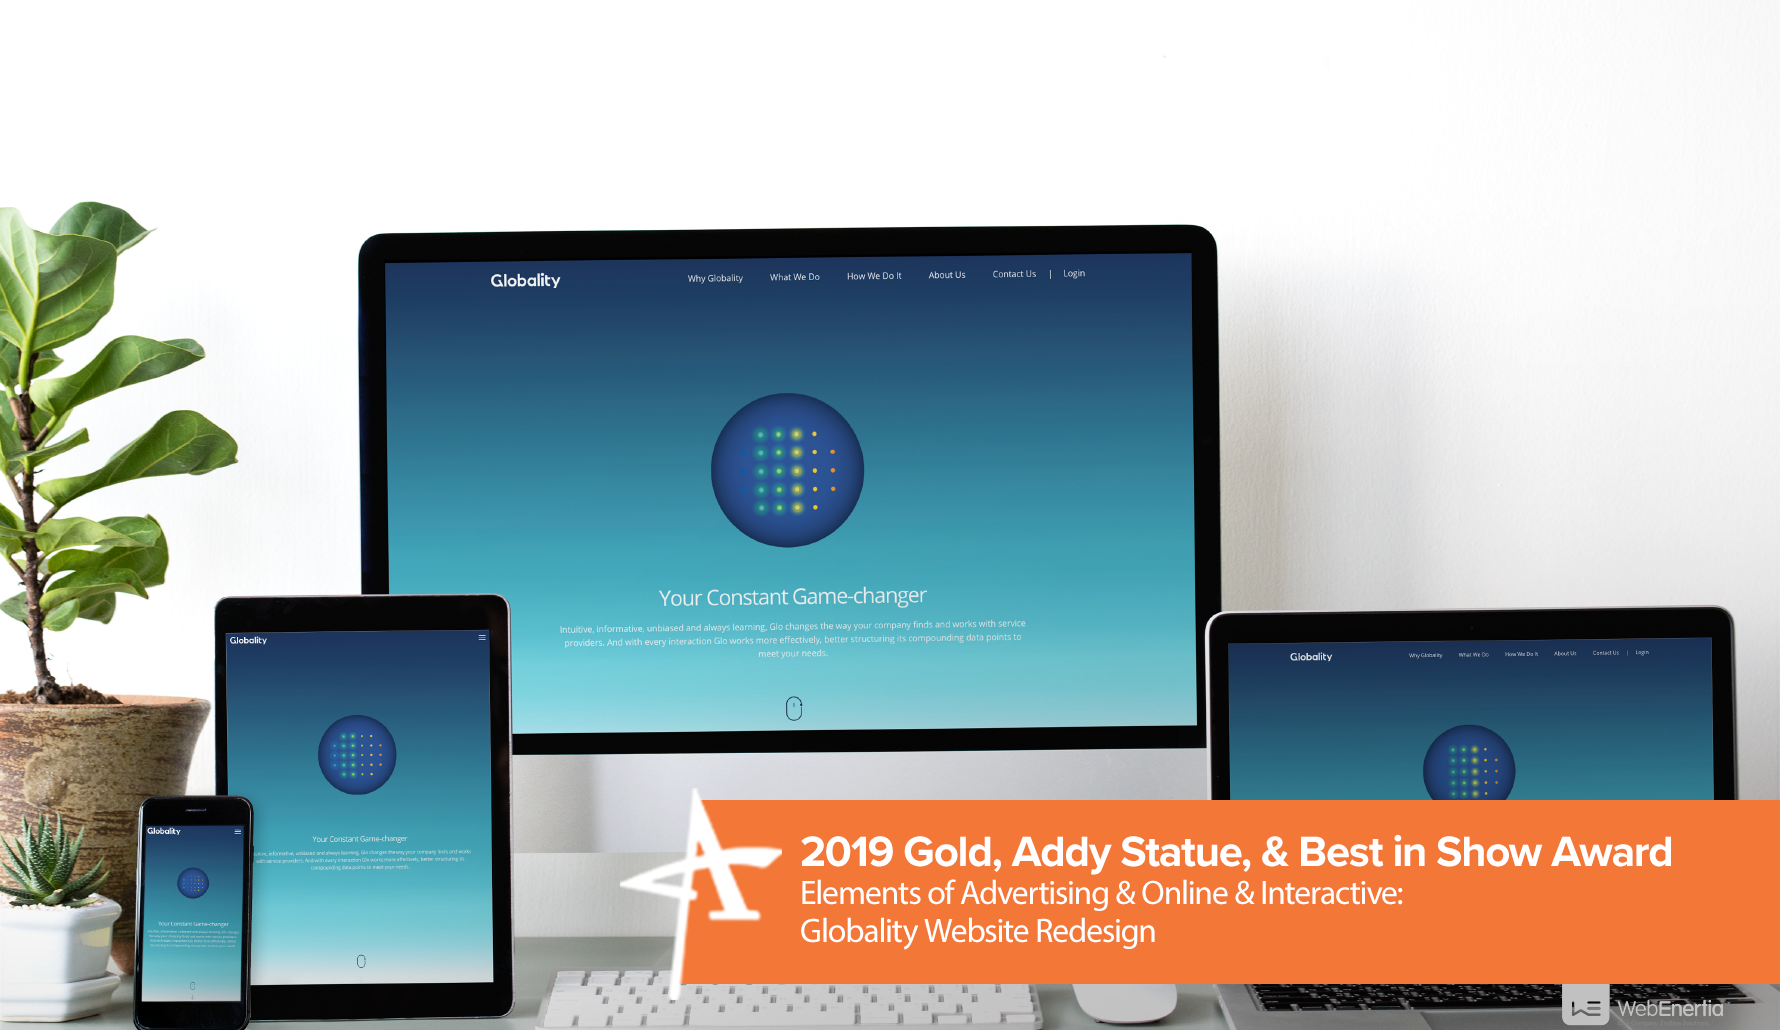 2019 Gold, Addy Statue & Best in Show Award - Elements of Advertising & Online & Interactive: Globality Website Redesign